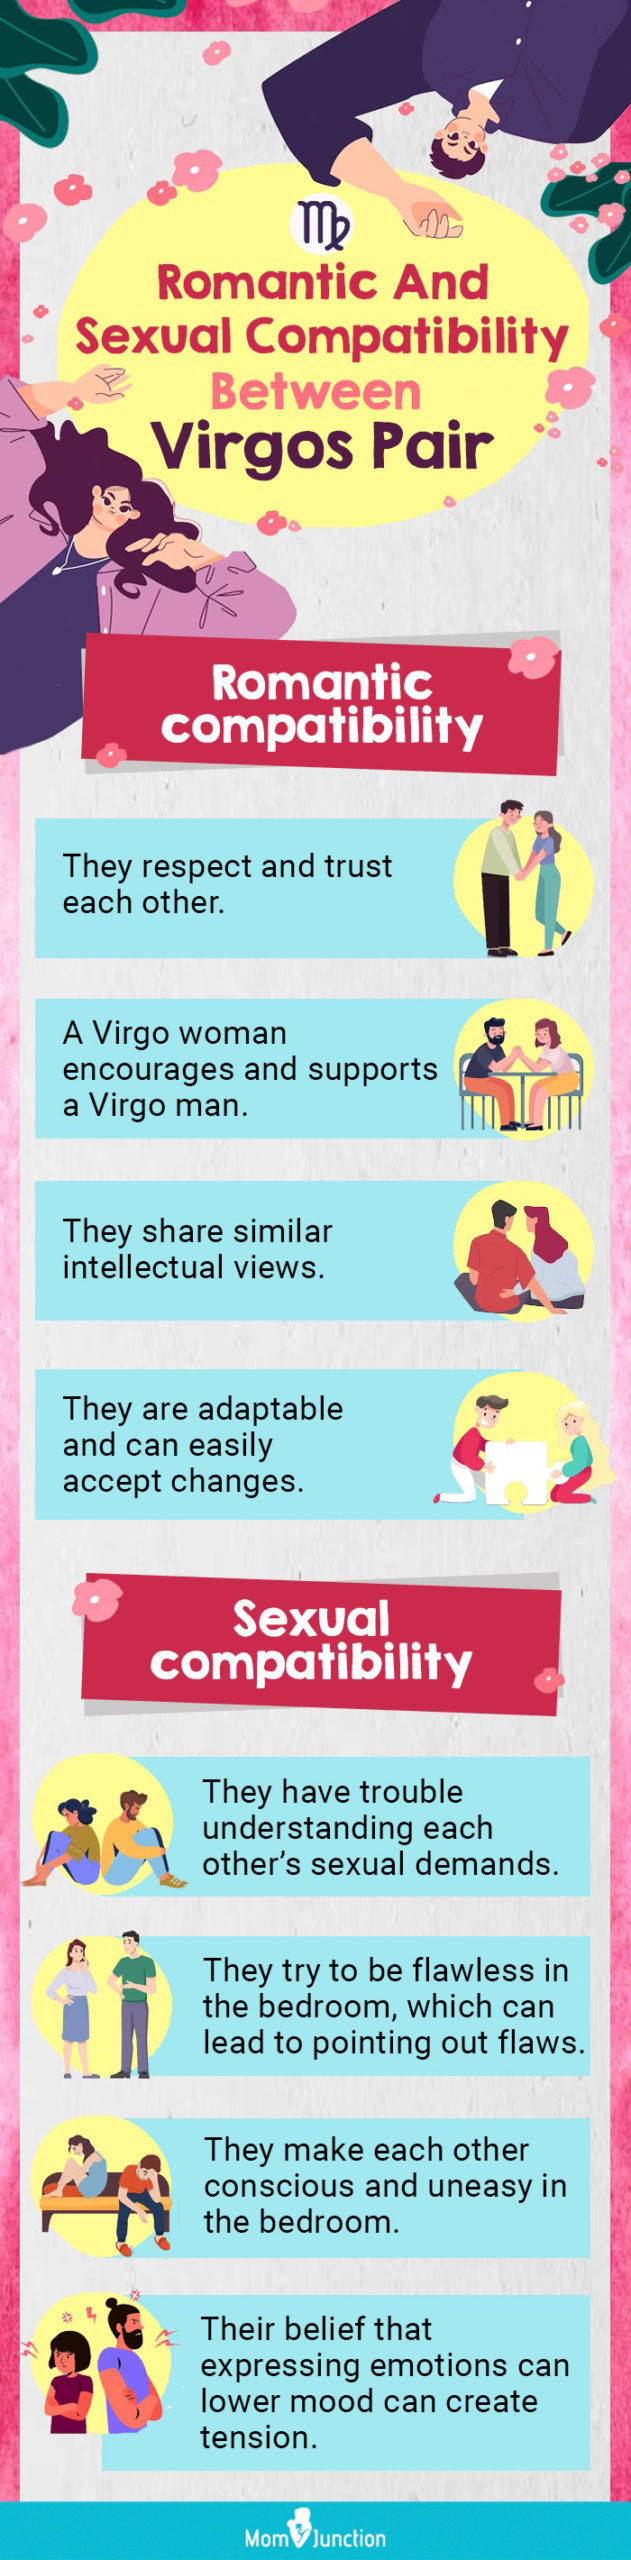 romantic and sexual compatibility between virgos pair (infographic)